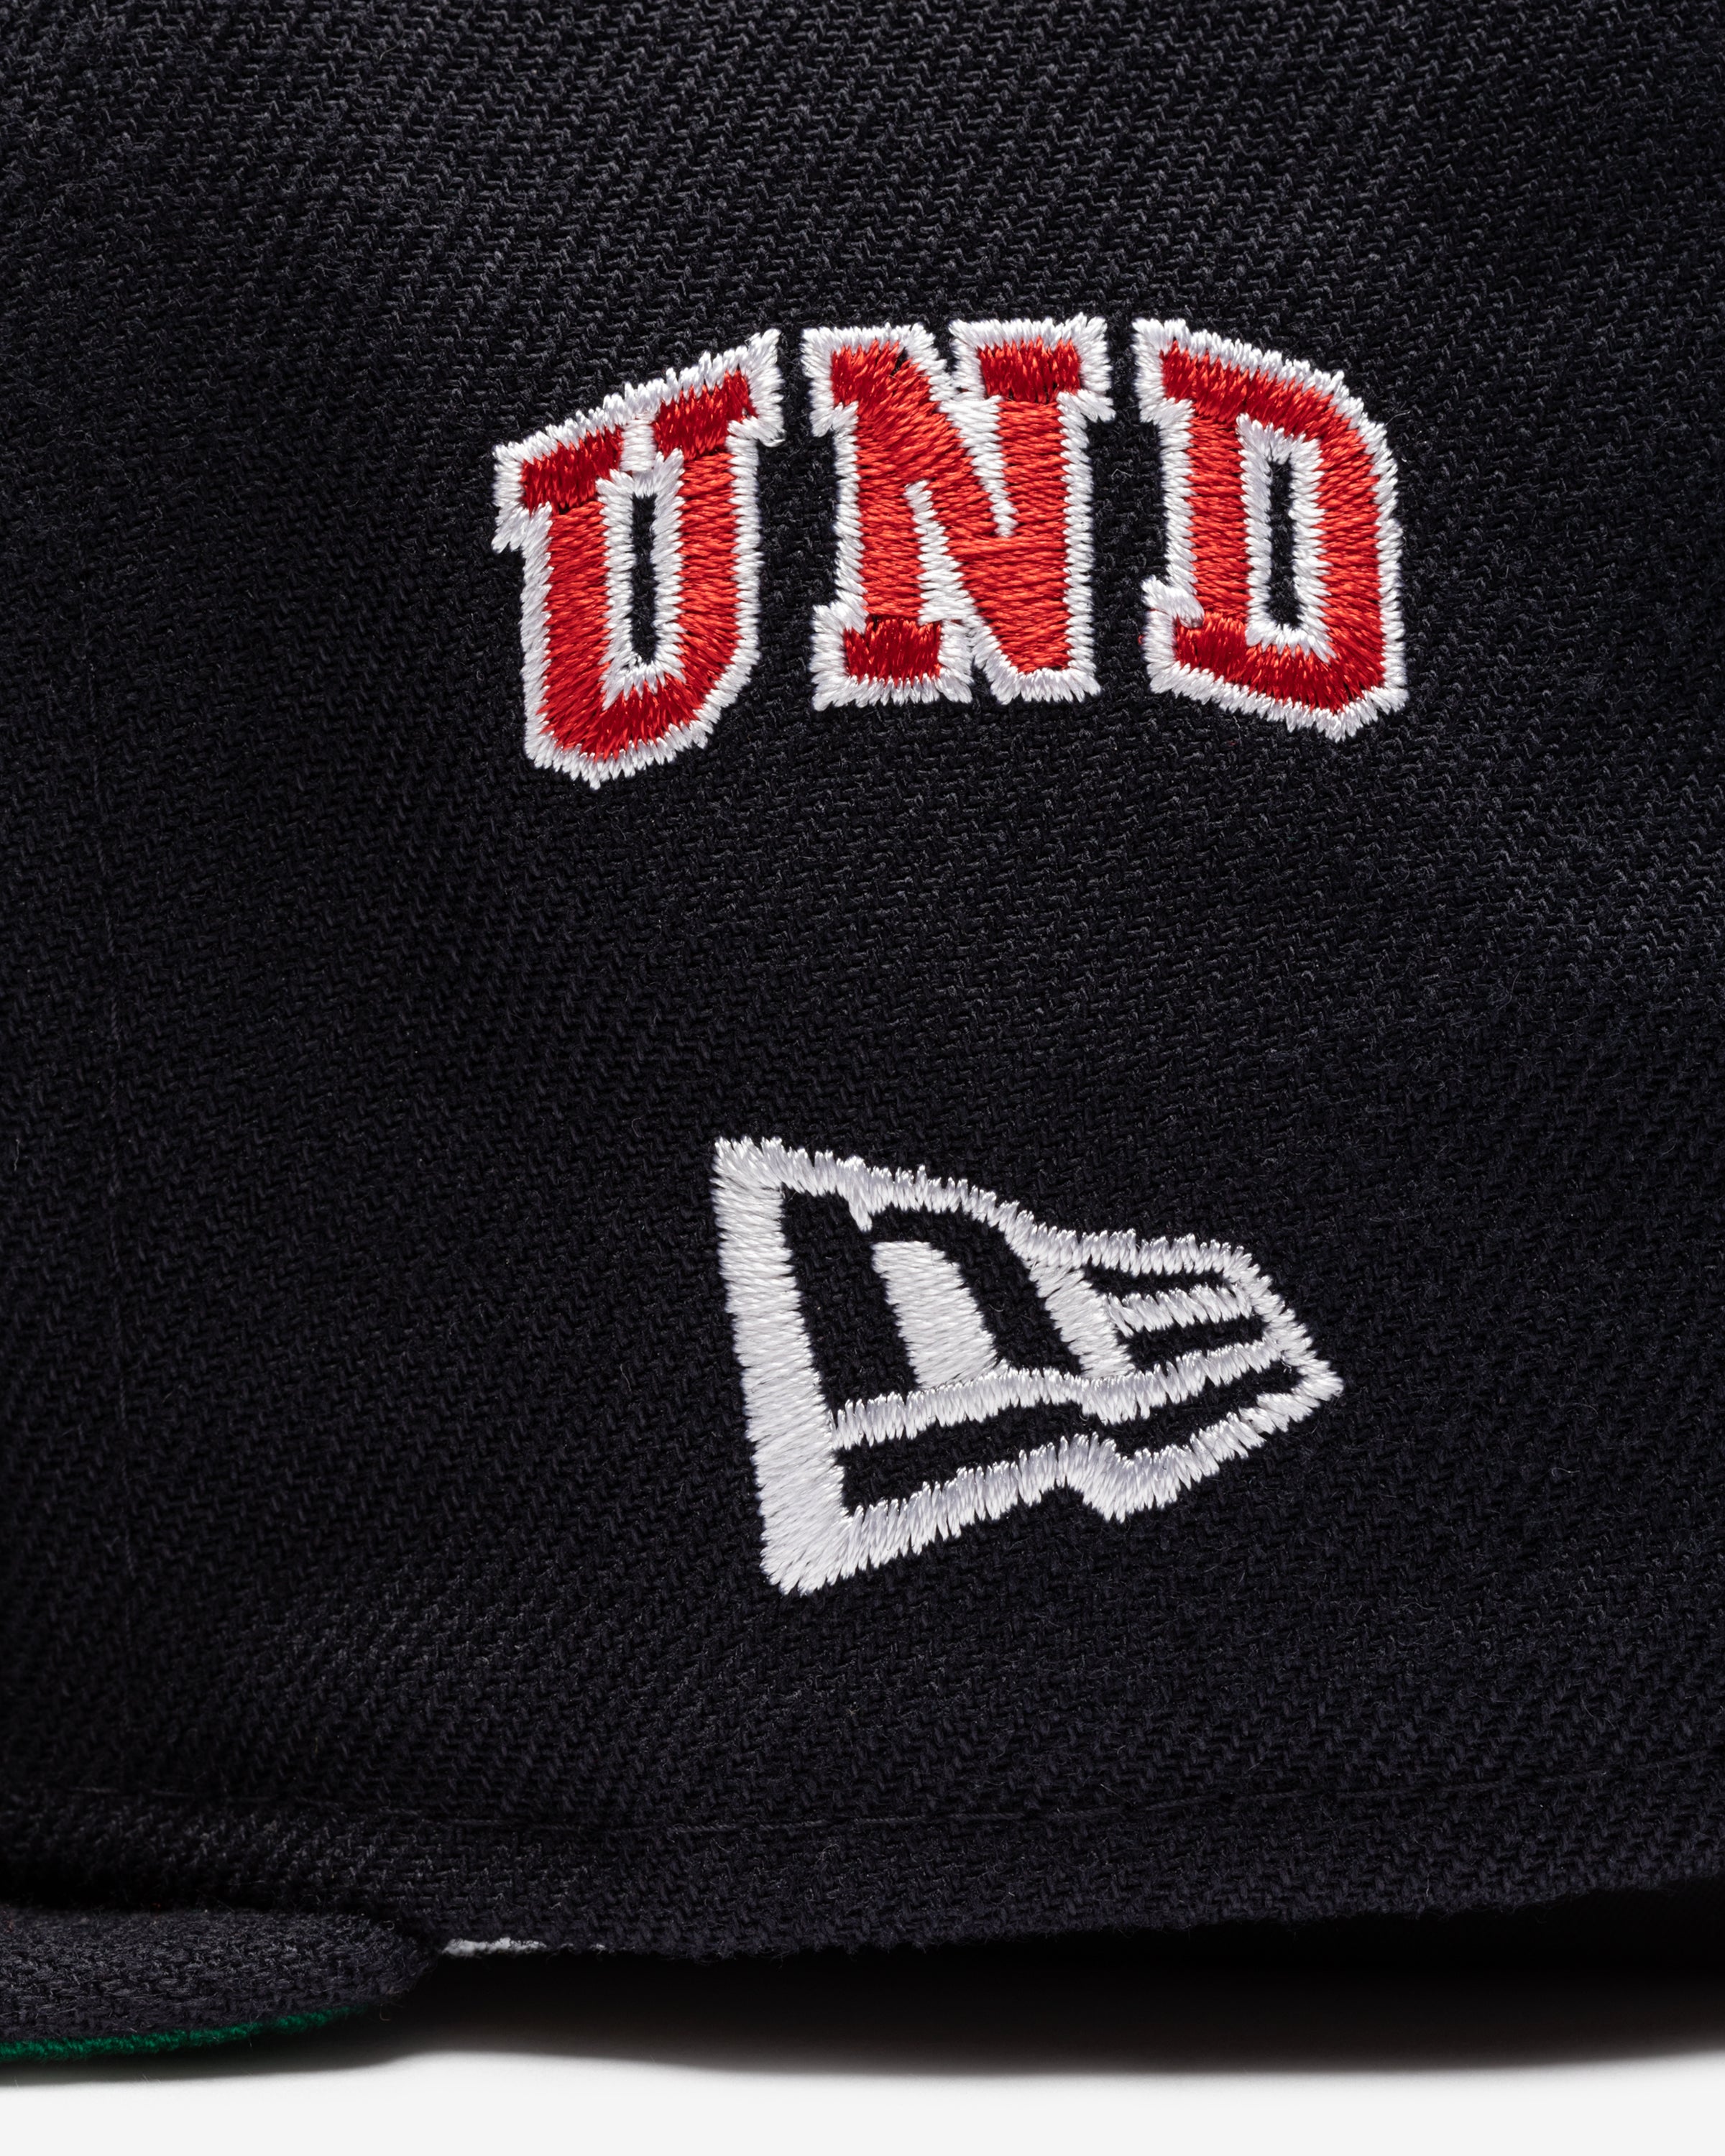 UNDEFEATED X NE X MLB FITTED - BOSTON RED SOX